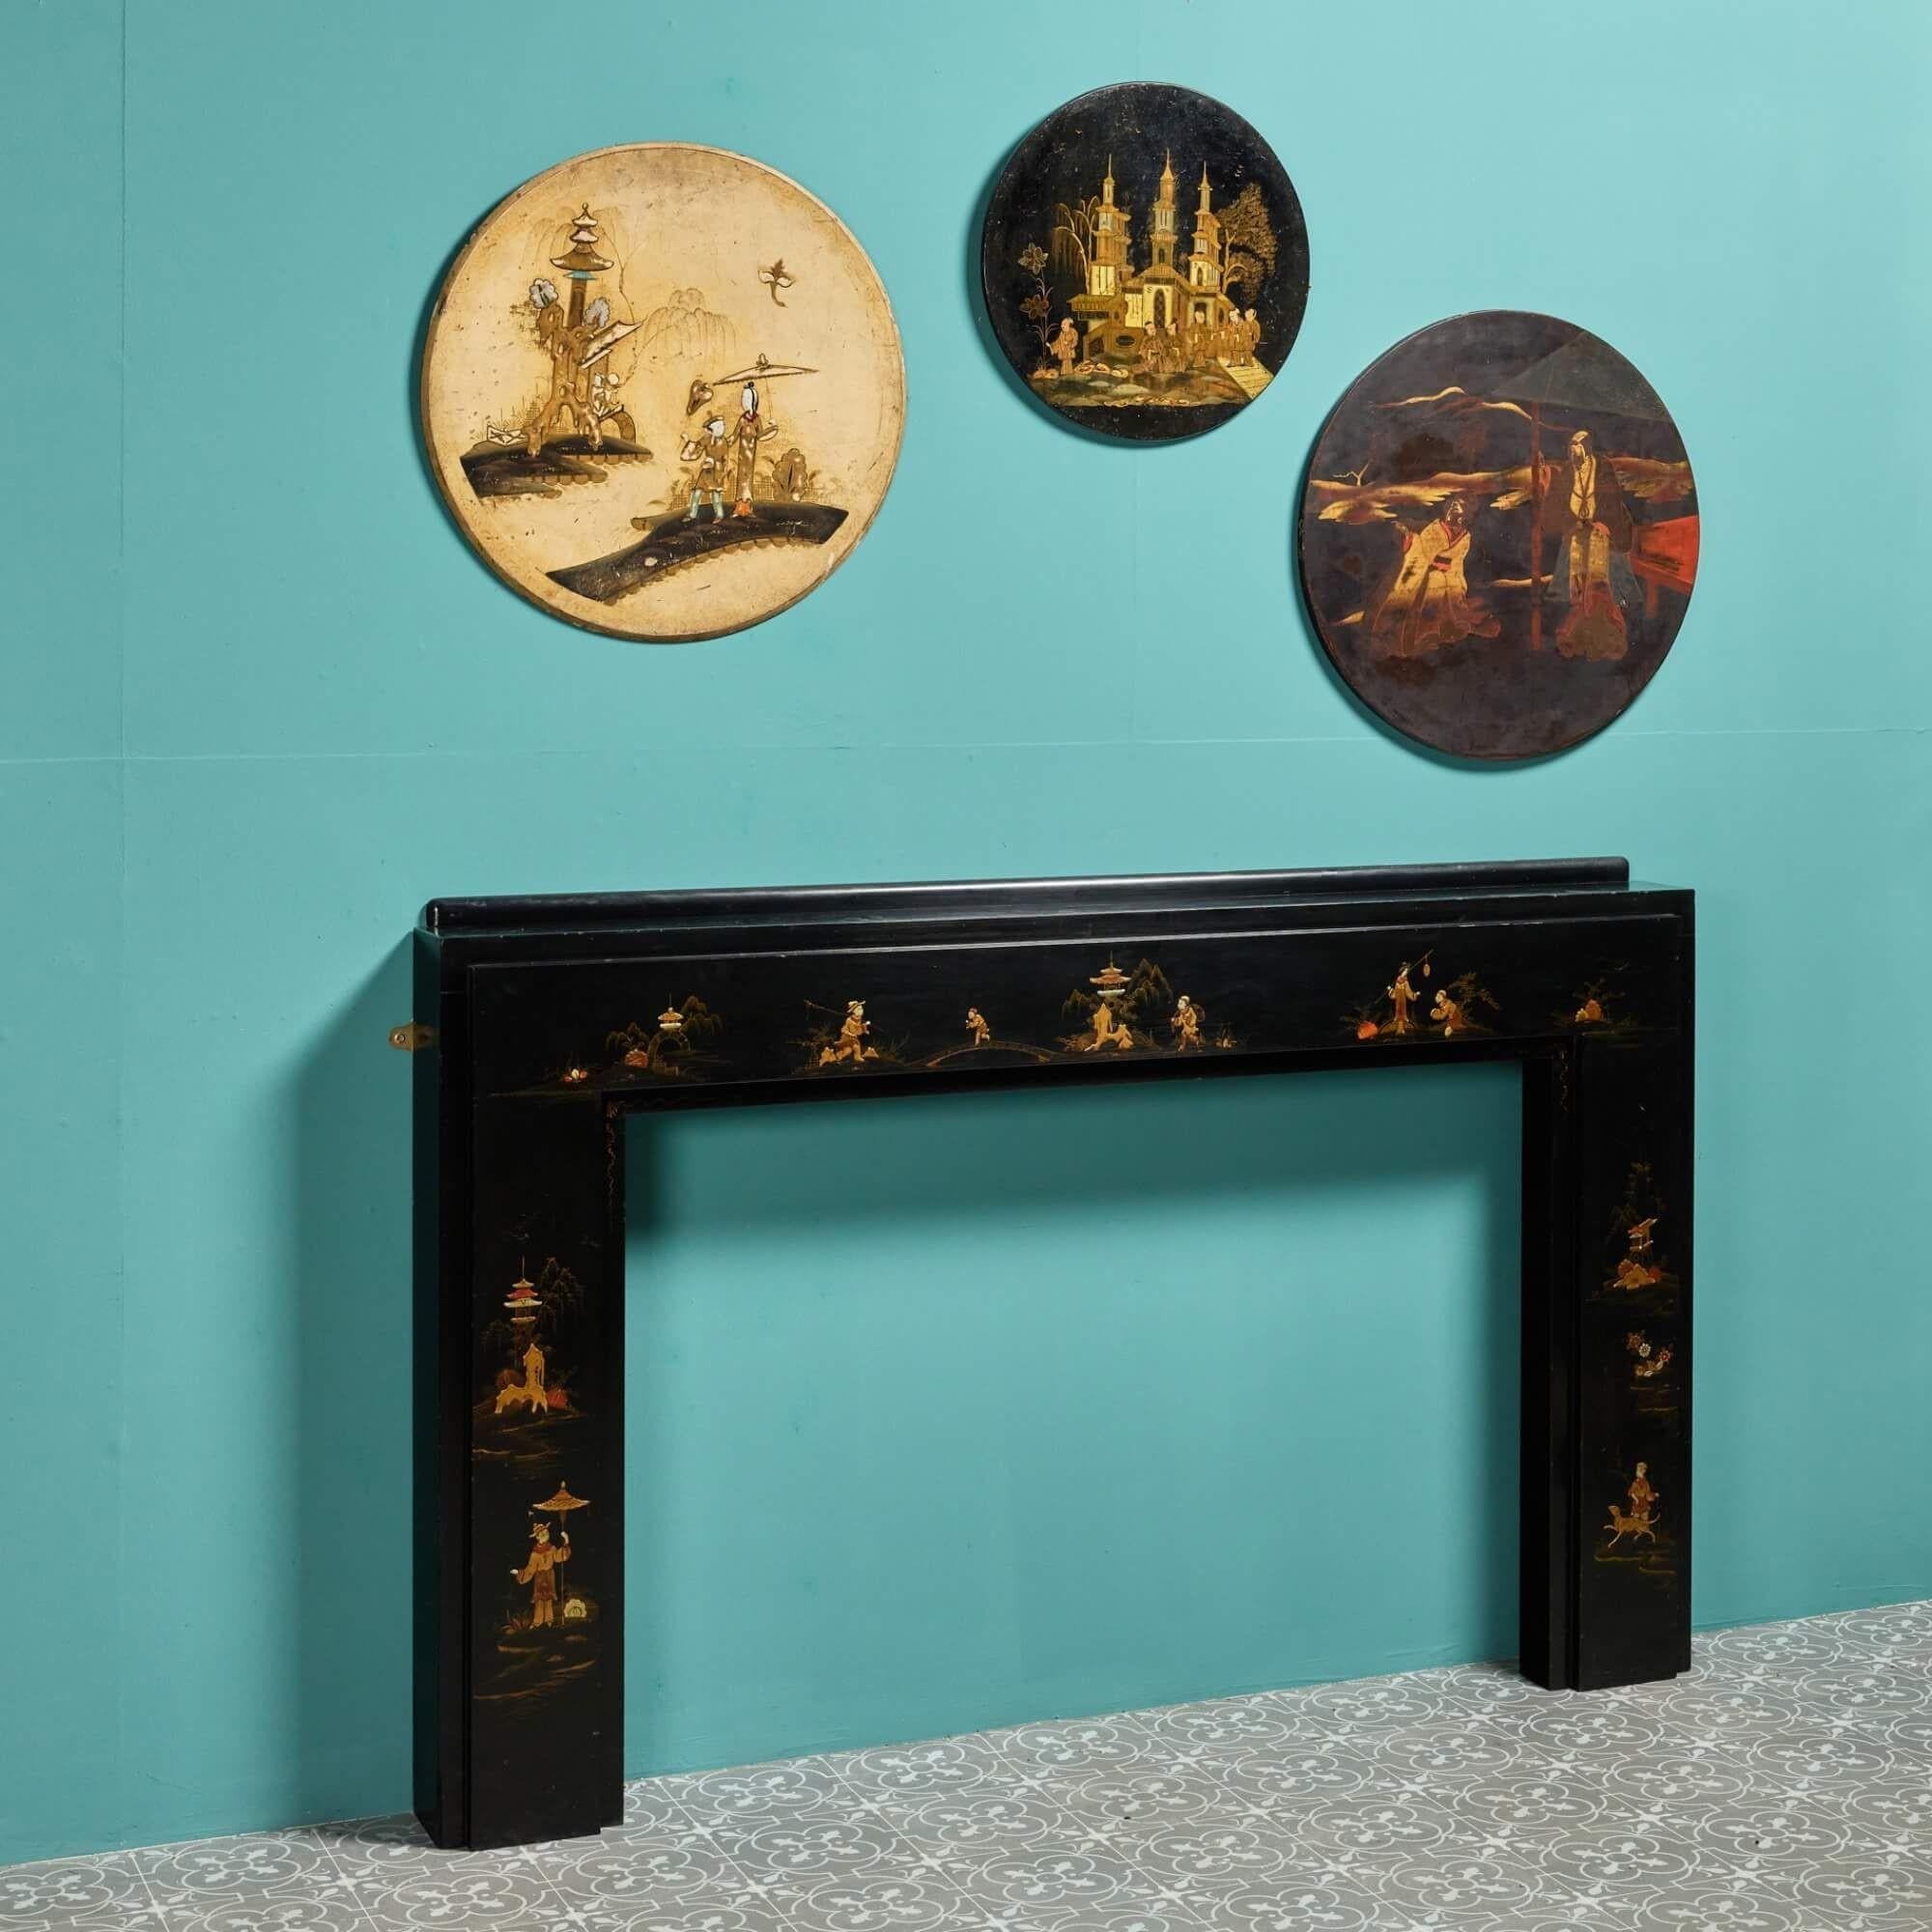 19th Century Set of 3 Decorative Round Chinoiserie Wall Hangings For Sale